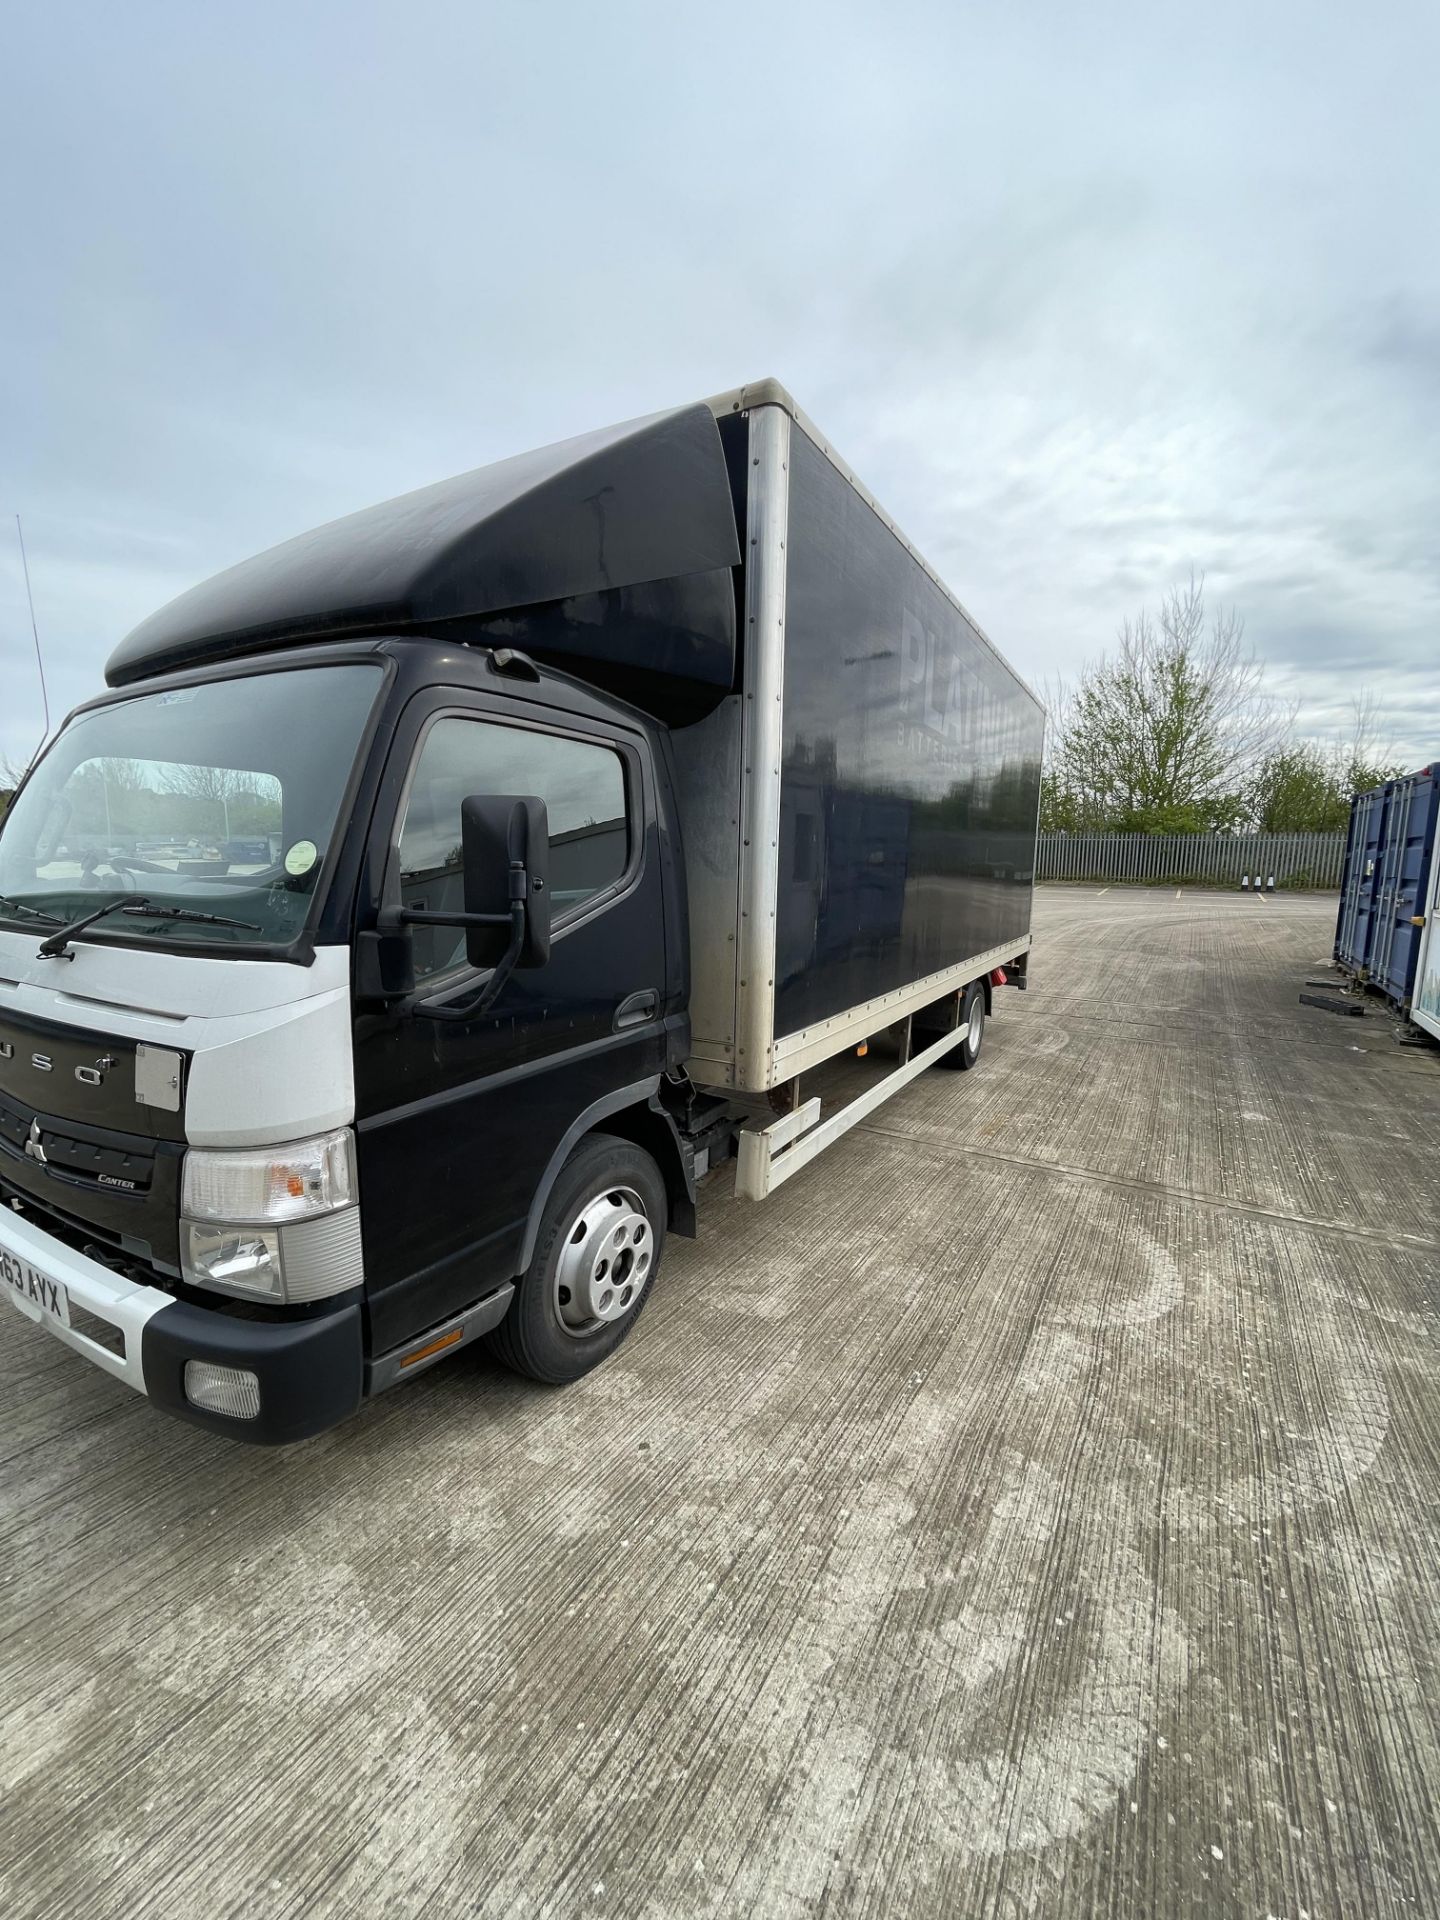 Mitsubishi Fuso Canter 7C15 47 box van (W63 AYX), date of first registration: 24/12/2013, odometer r - Image 2 of 8